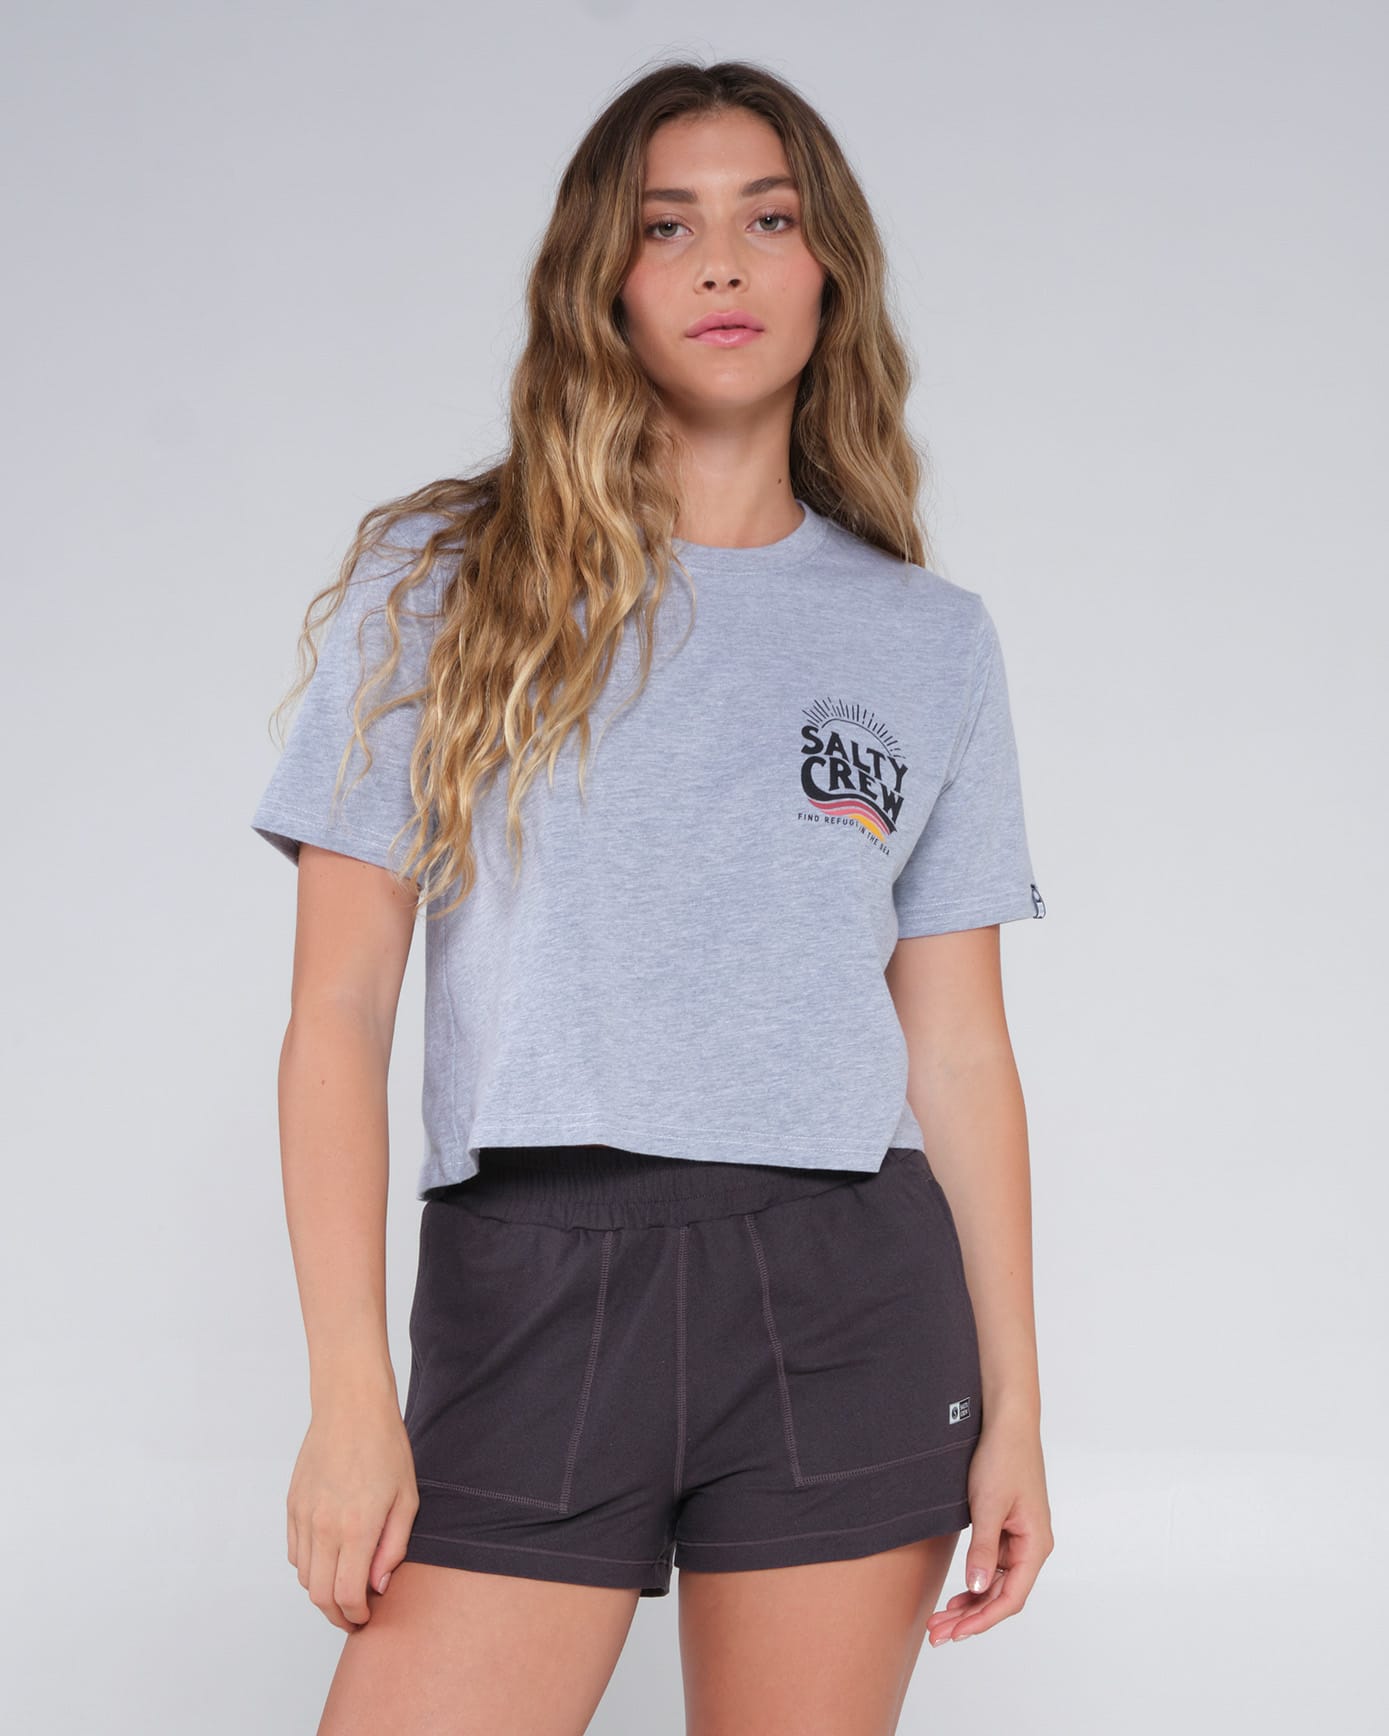 Salty crew T-SHIRTS S/S THE WAVE CROP TEE - Athletic Heather in Athletic Heather